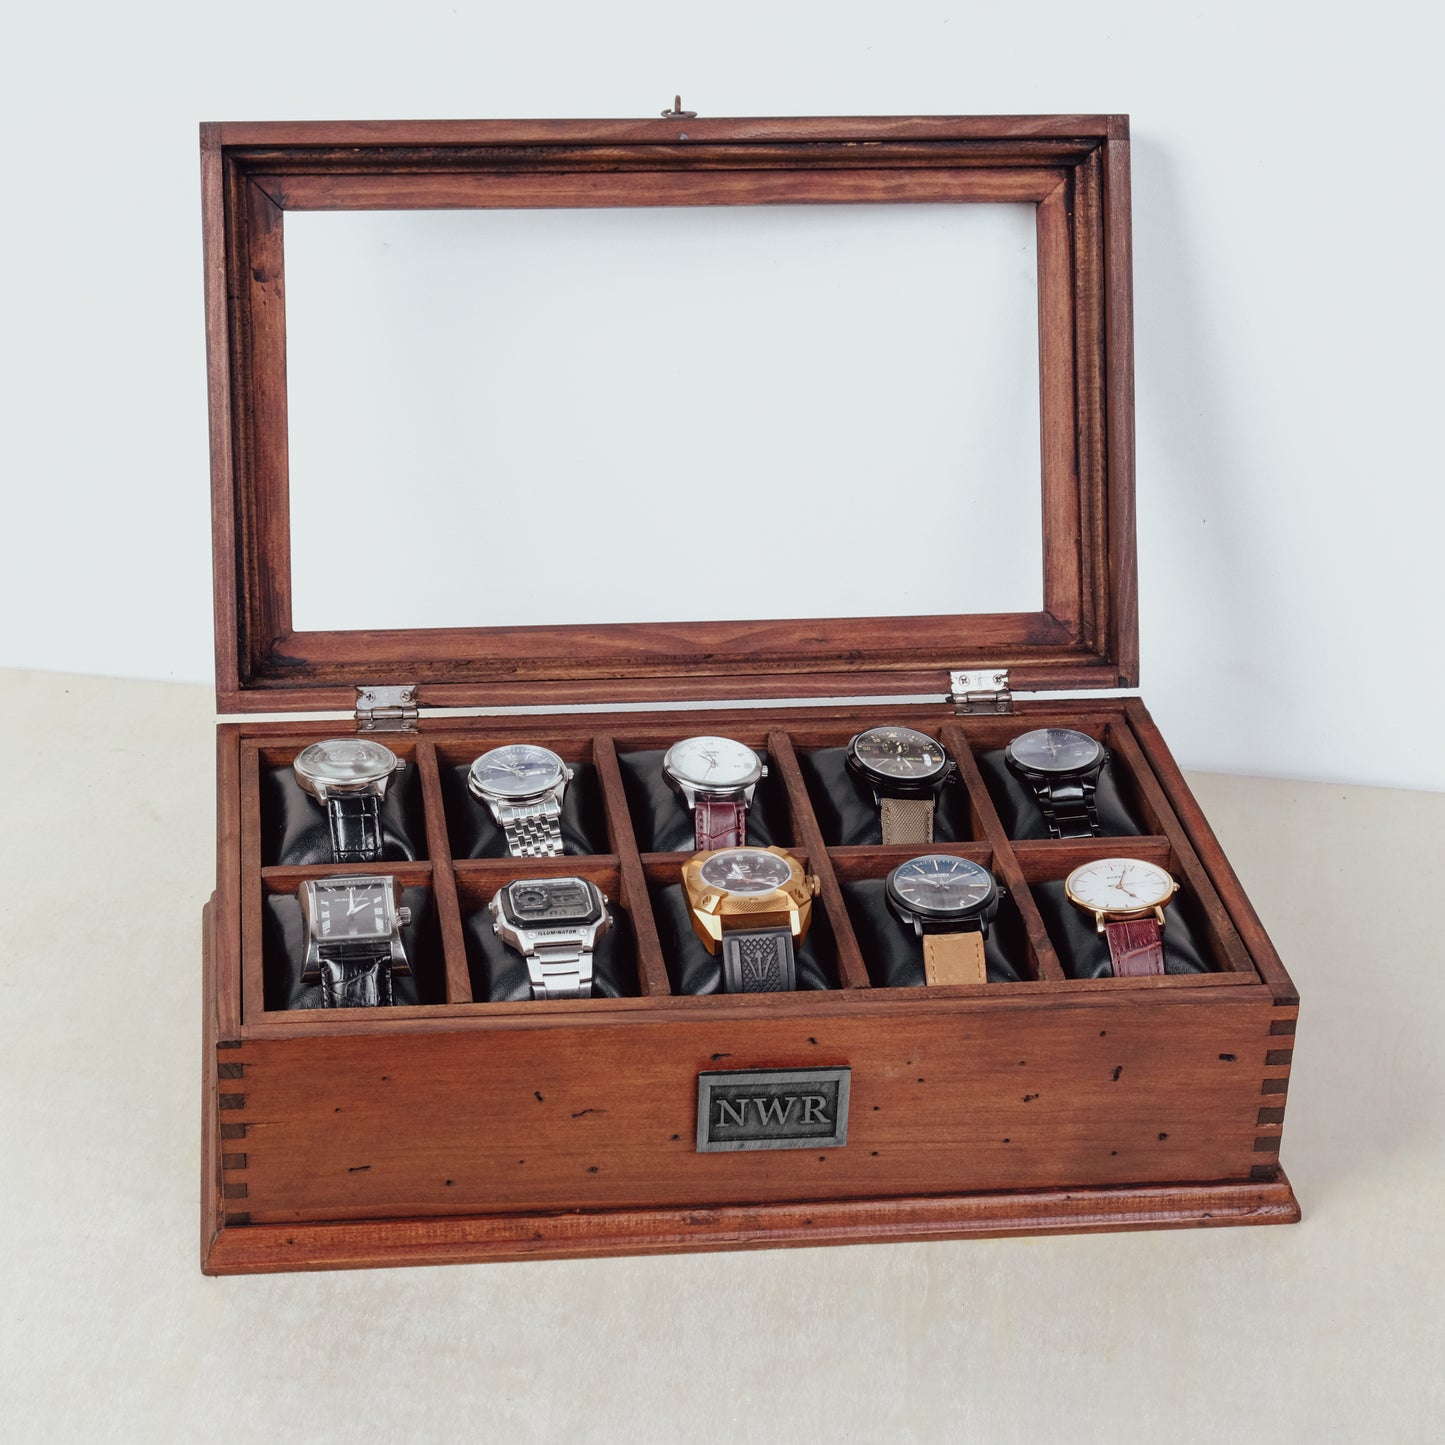 Watch Box for 10 Watches with a Secret Compartment. - Deferichs